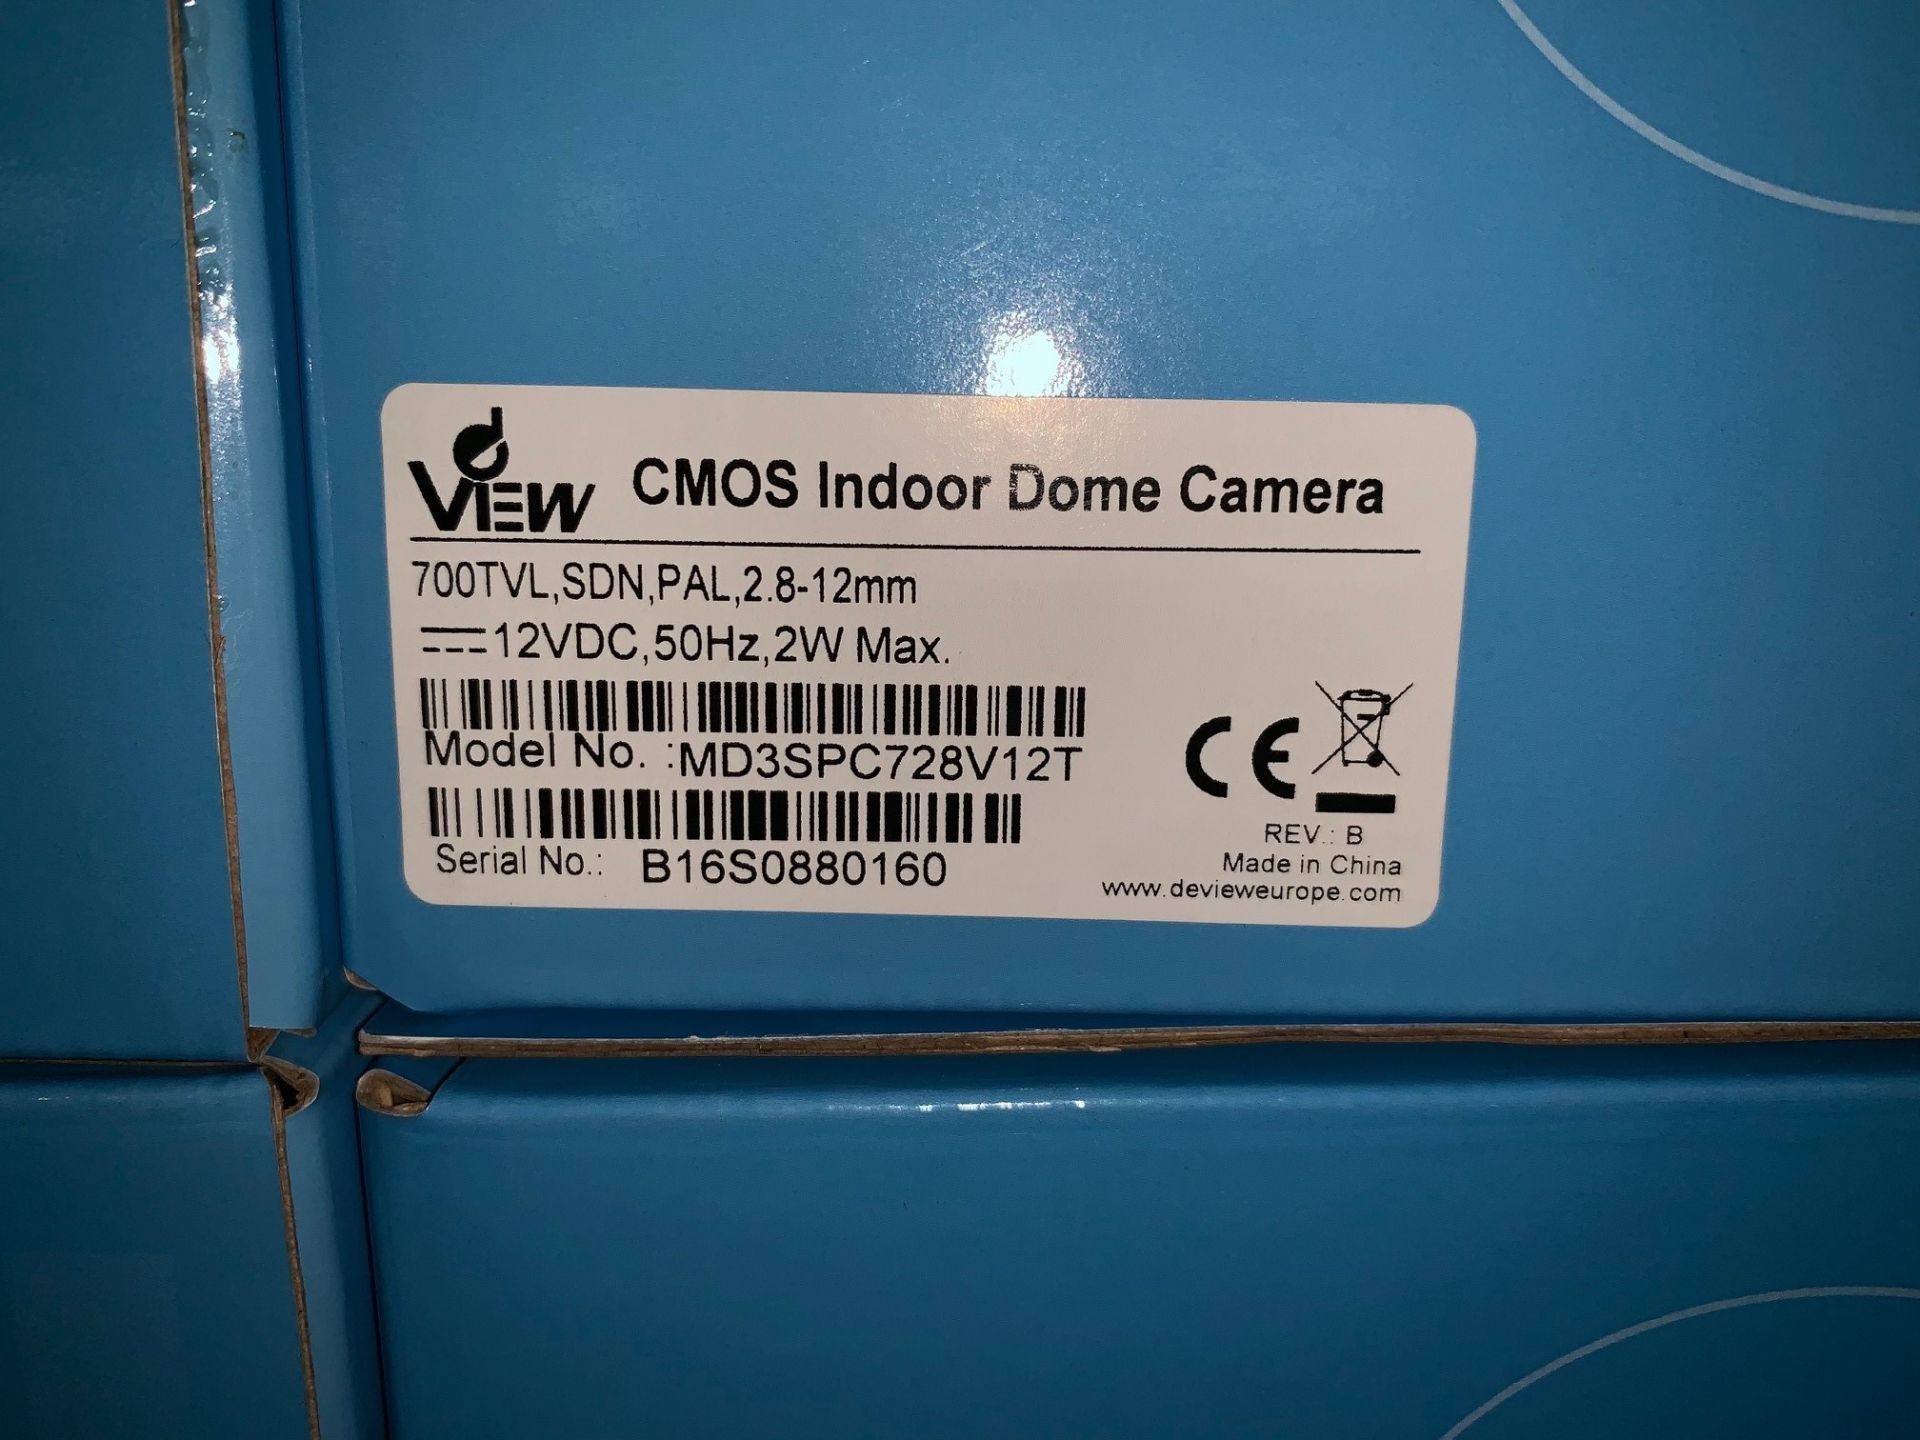 4 x dView CMOS Indoor Dome Cameras - 700TVL, SDN, PAL, 2.8-12mm - Model MD3SPC728V12T (Brand New & - Image 2 of 3